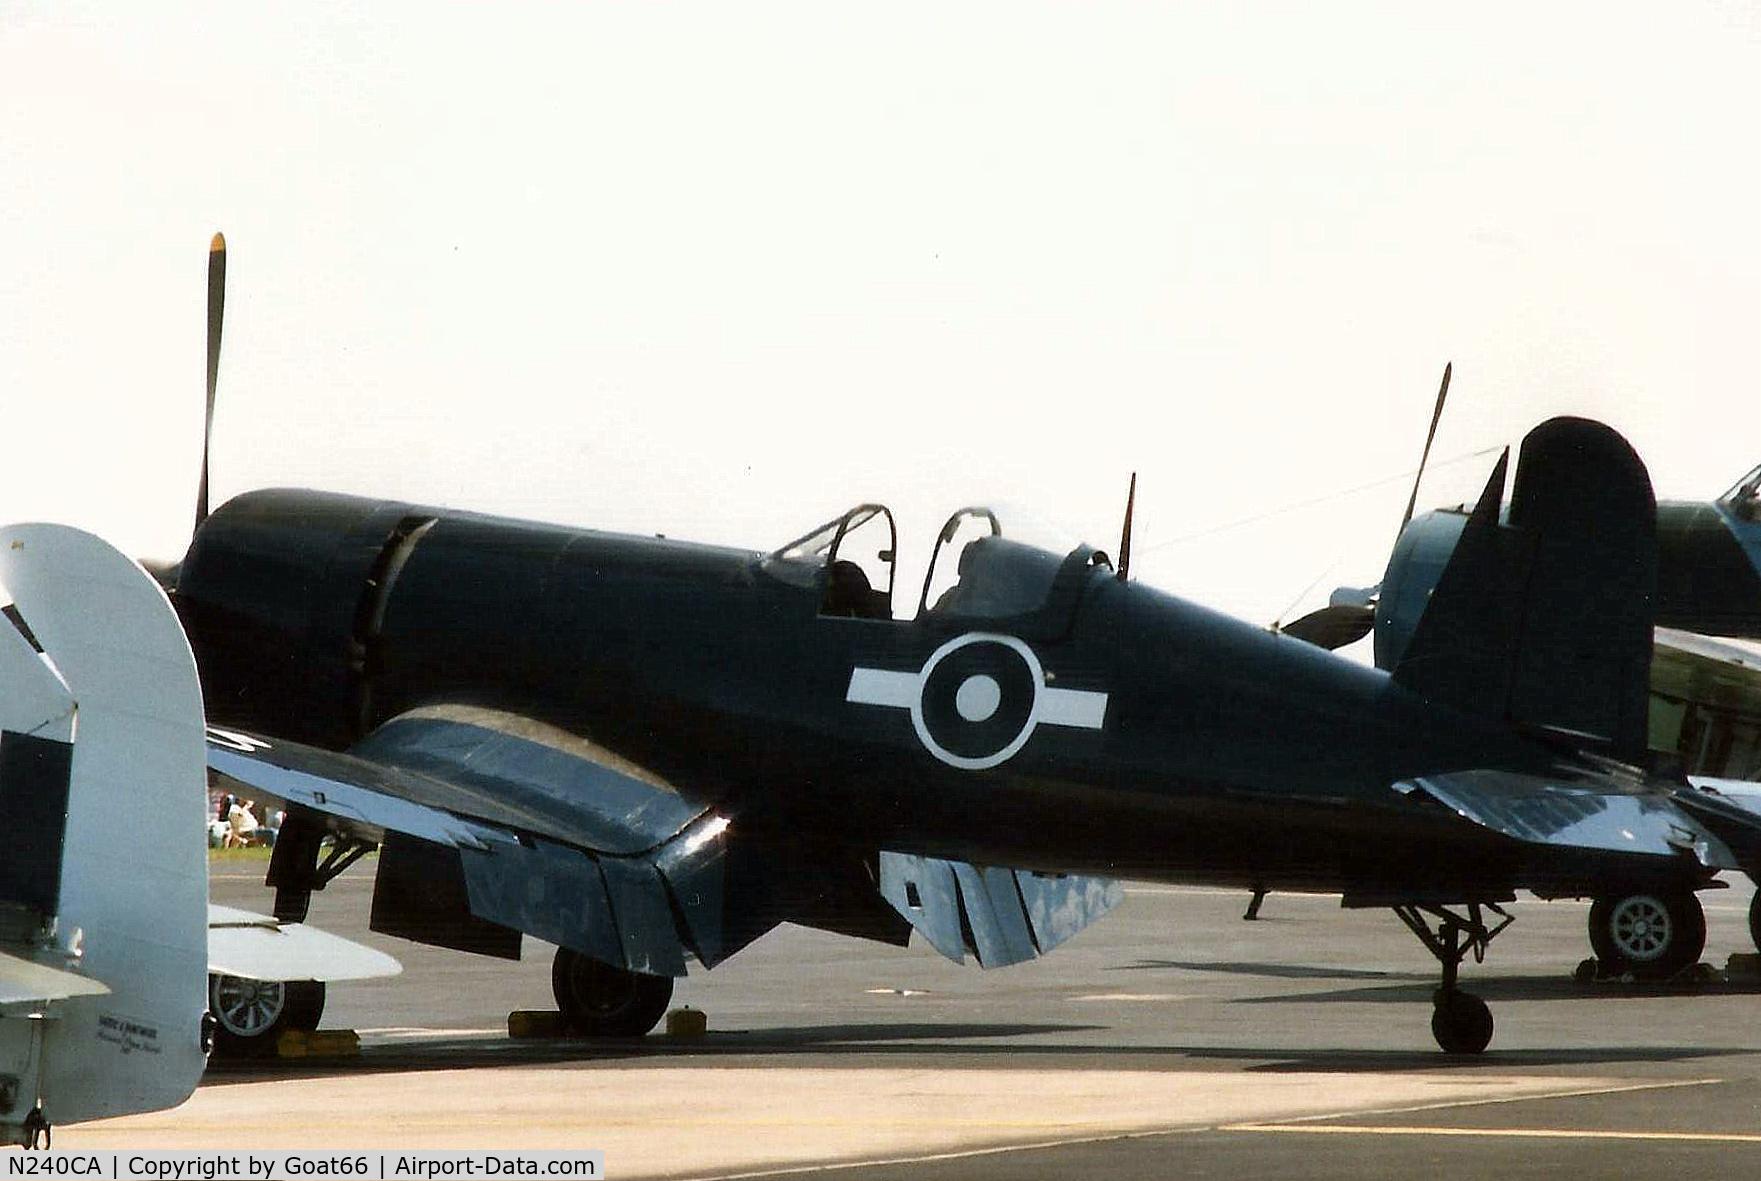 N240CA, 1945 Vought F4U-4 Corsair C/N 9513, Taken during ownership by The Old Flying Machine Company, and wearing SEAC roundels at RAF Mildenhall May 1988